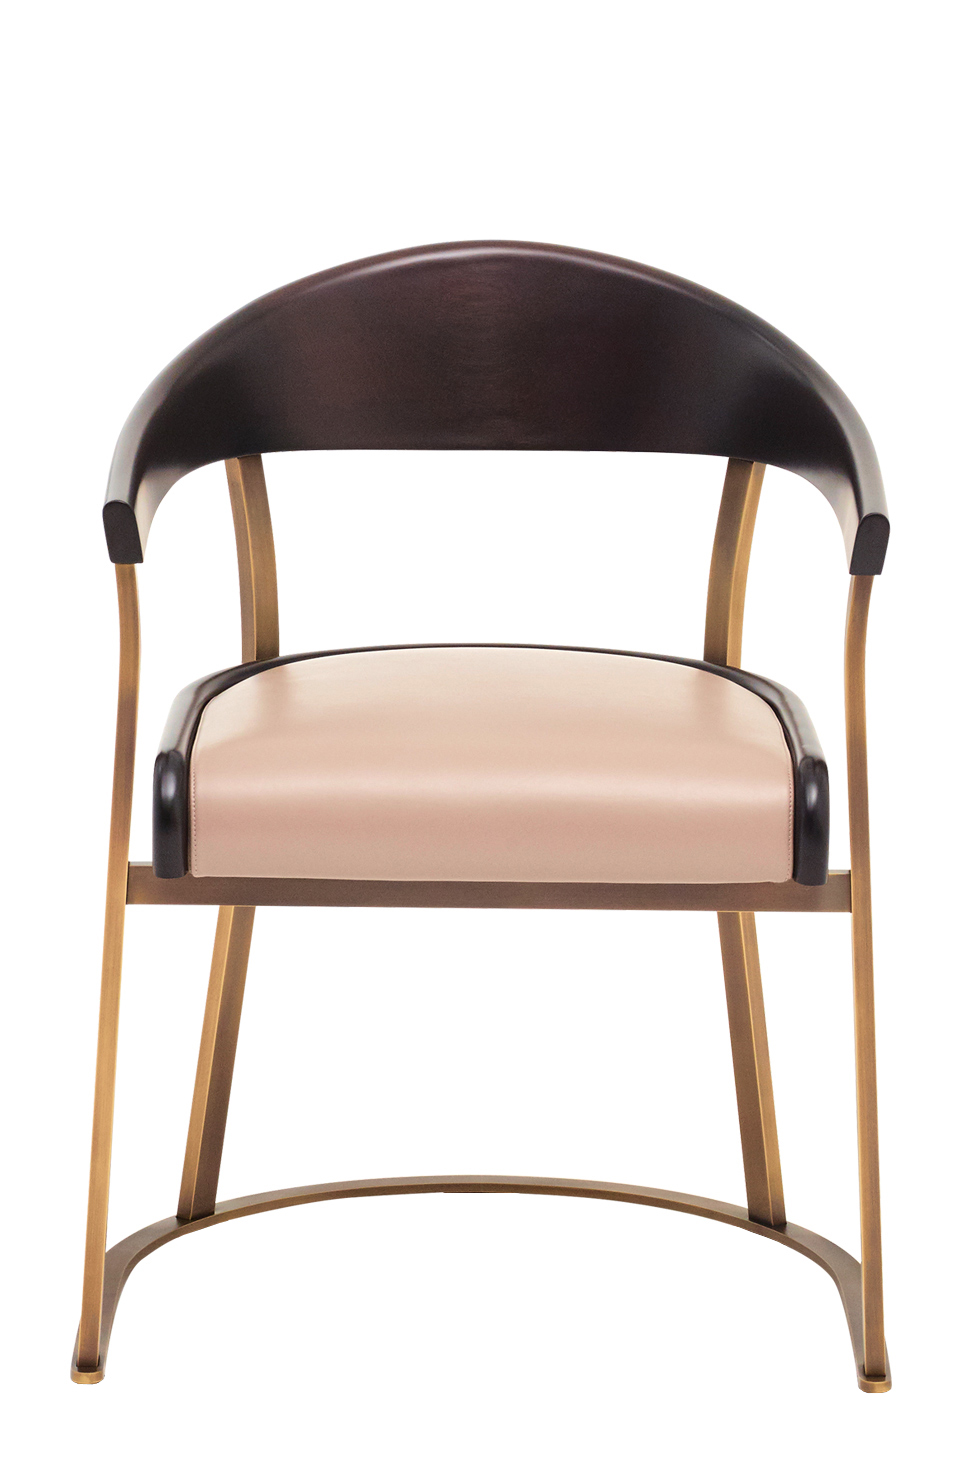 /mediaRachele%20is%20a%20bronze%20chair%20with%20arms%20with%20wooden%20or%20leather%20back%20and%20leather%20seat,%20from%20Promemoria's%20catalogue%20|%20Promemoria